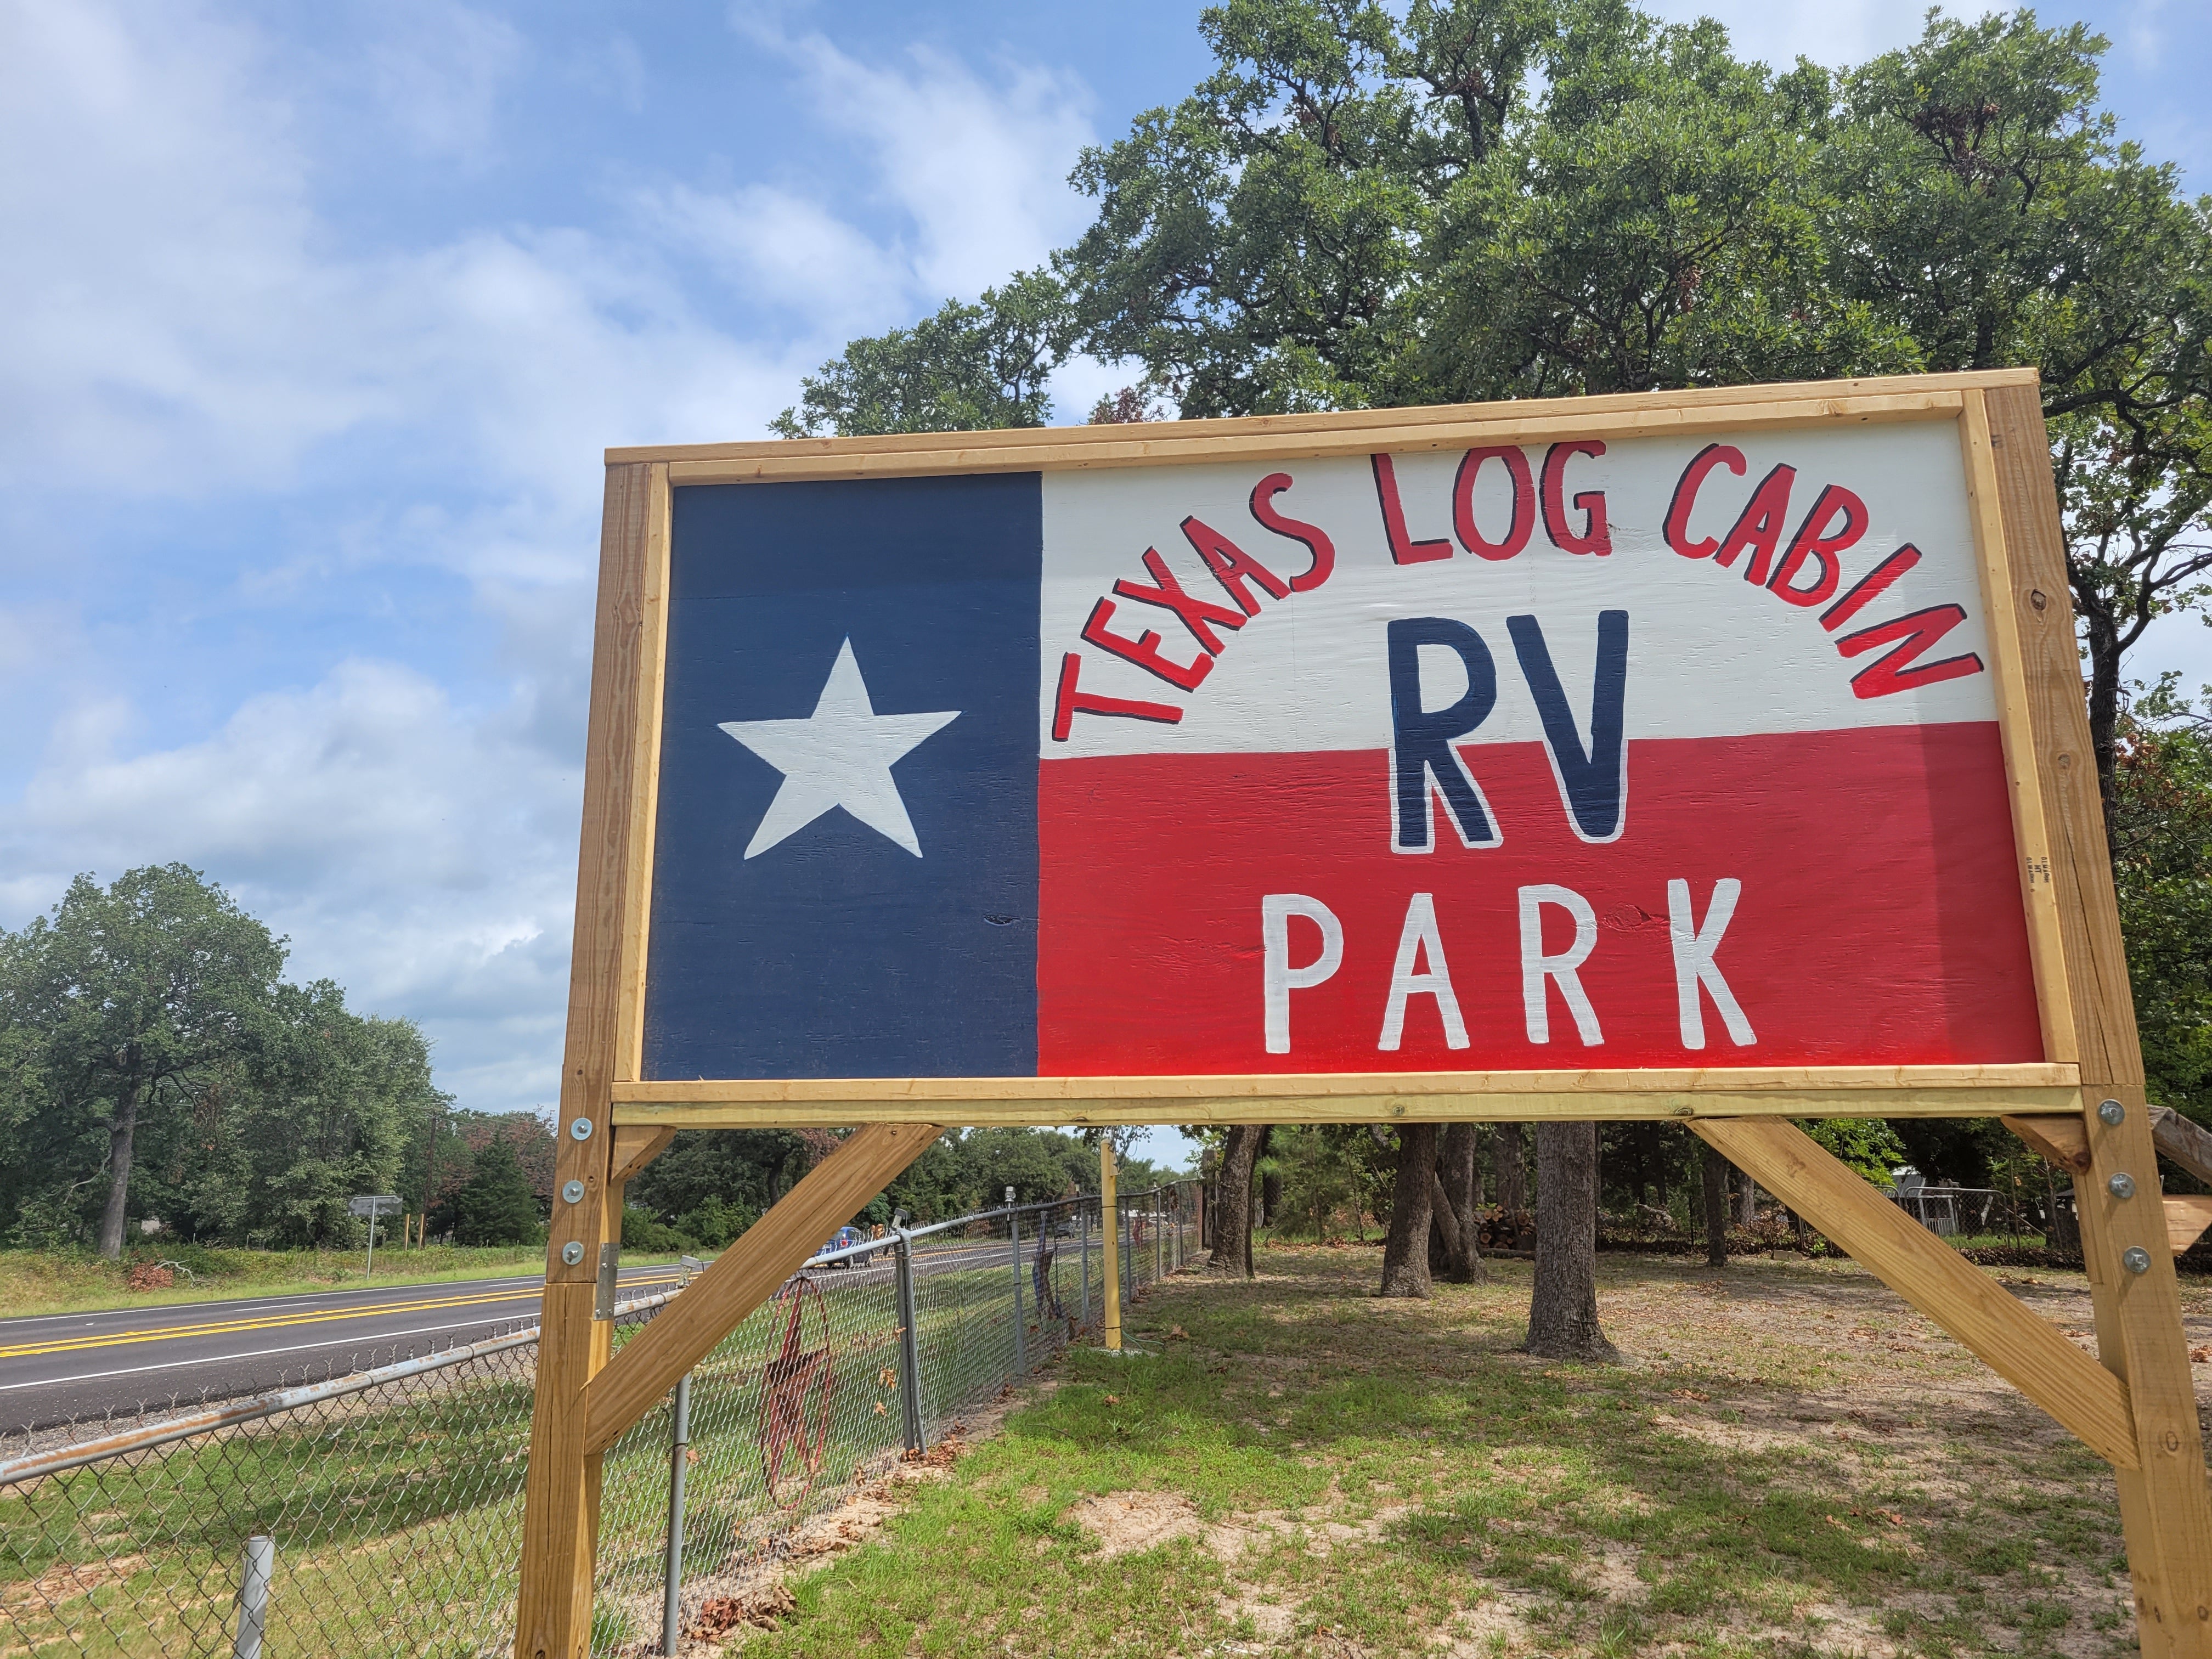 Camper submitted image from TX Log Cabin RV Park - 1